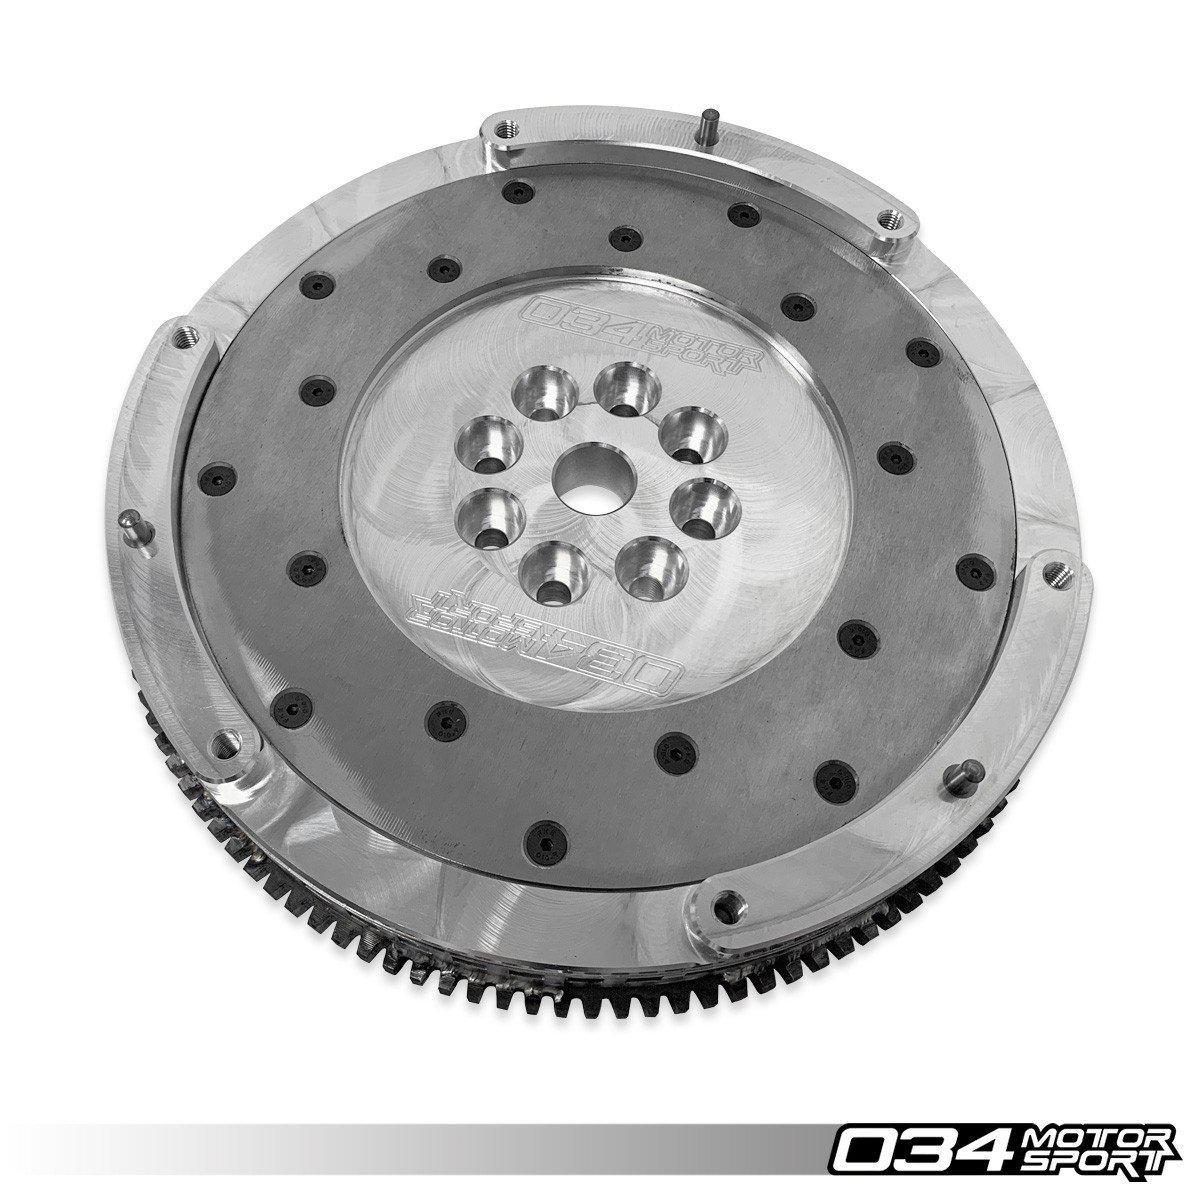 Flywheel, Aluminum, Lightweight, Audi B6/B7 S4 For Use With B7 Clutch-A Little Tuning Co